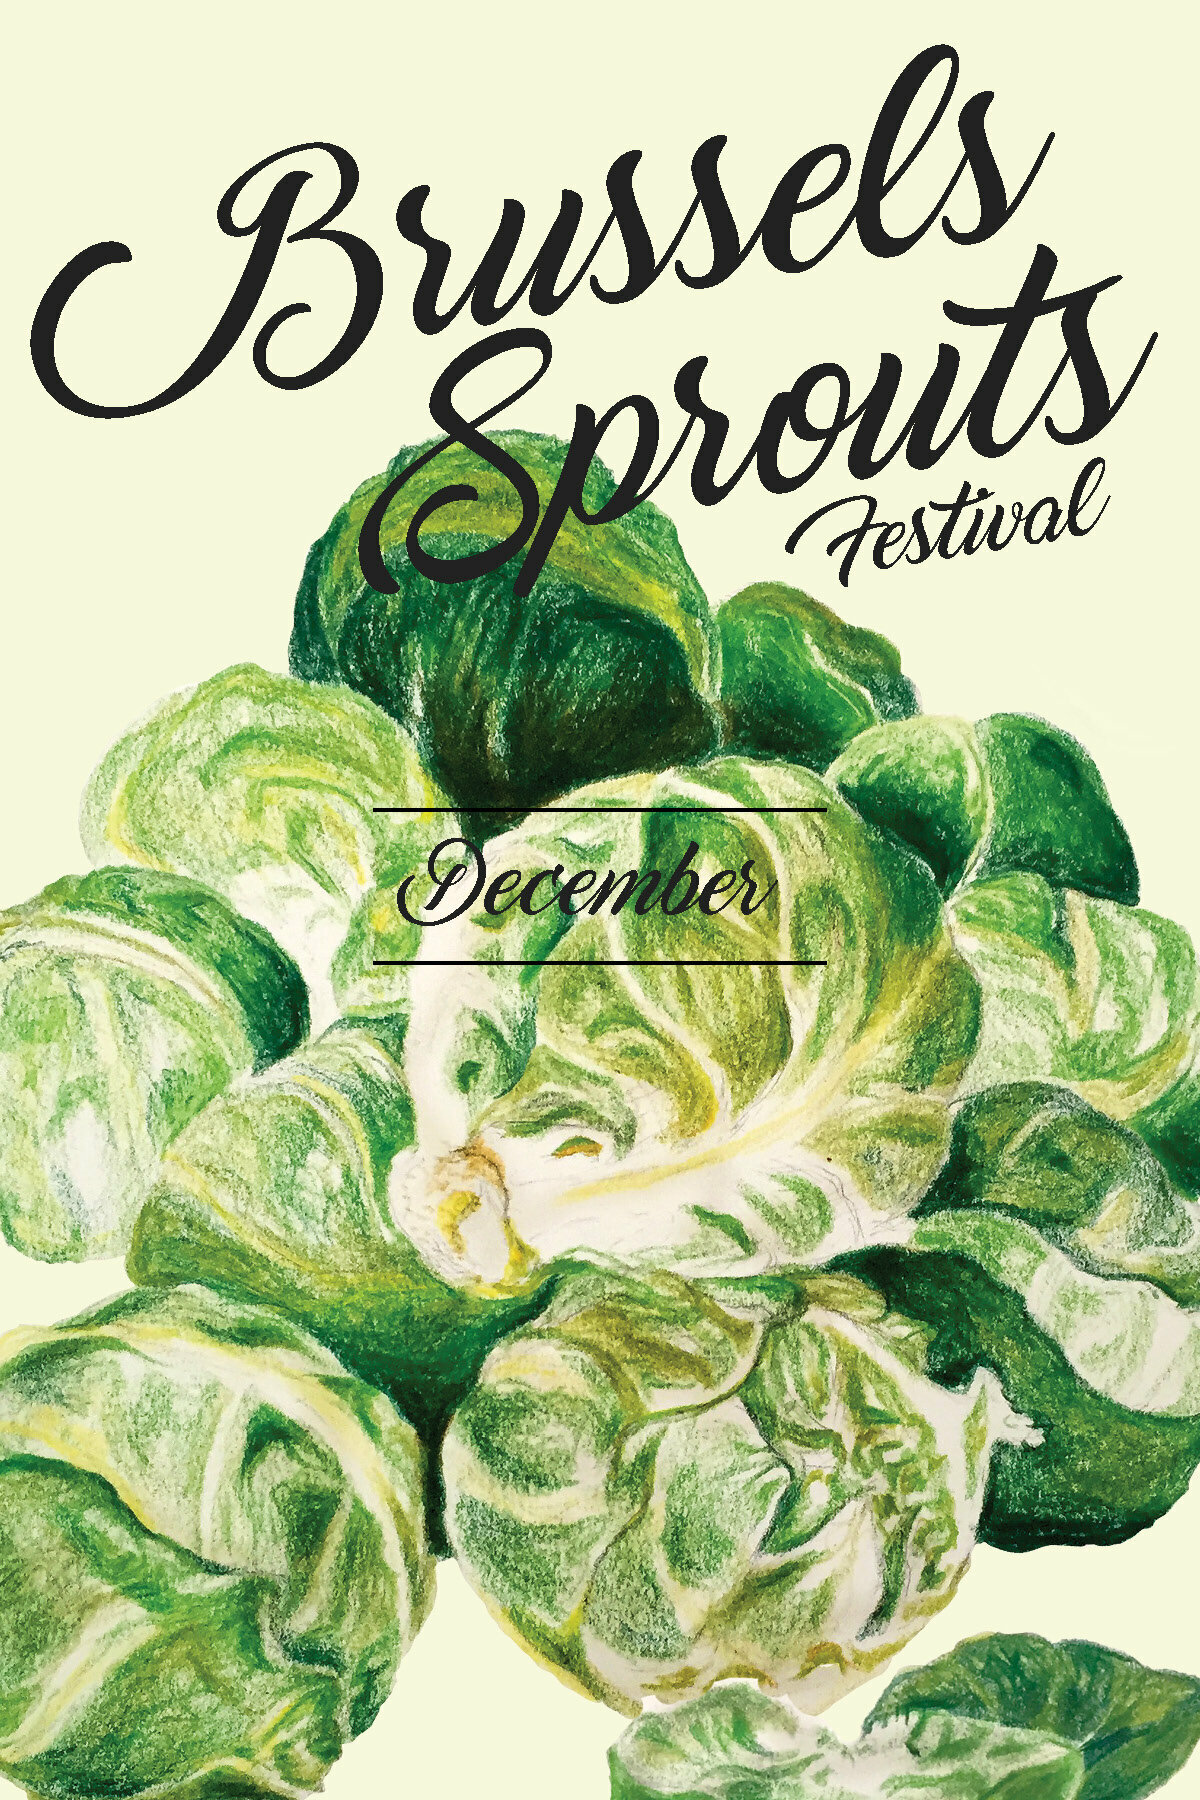 December Café Festival: Brussels Sprouts (With a Recipe)